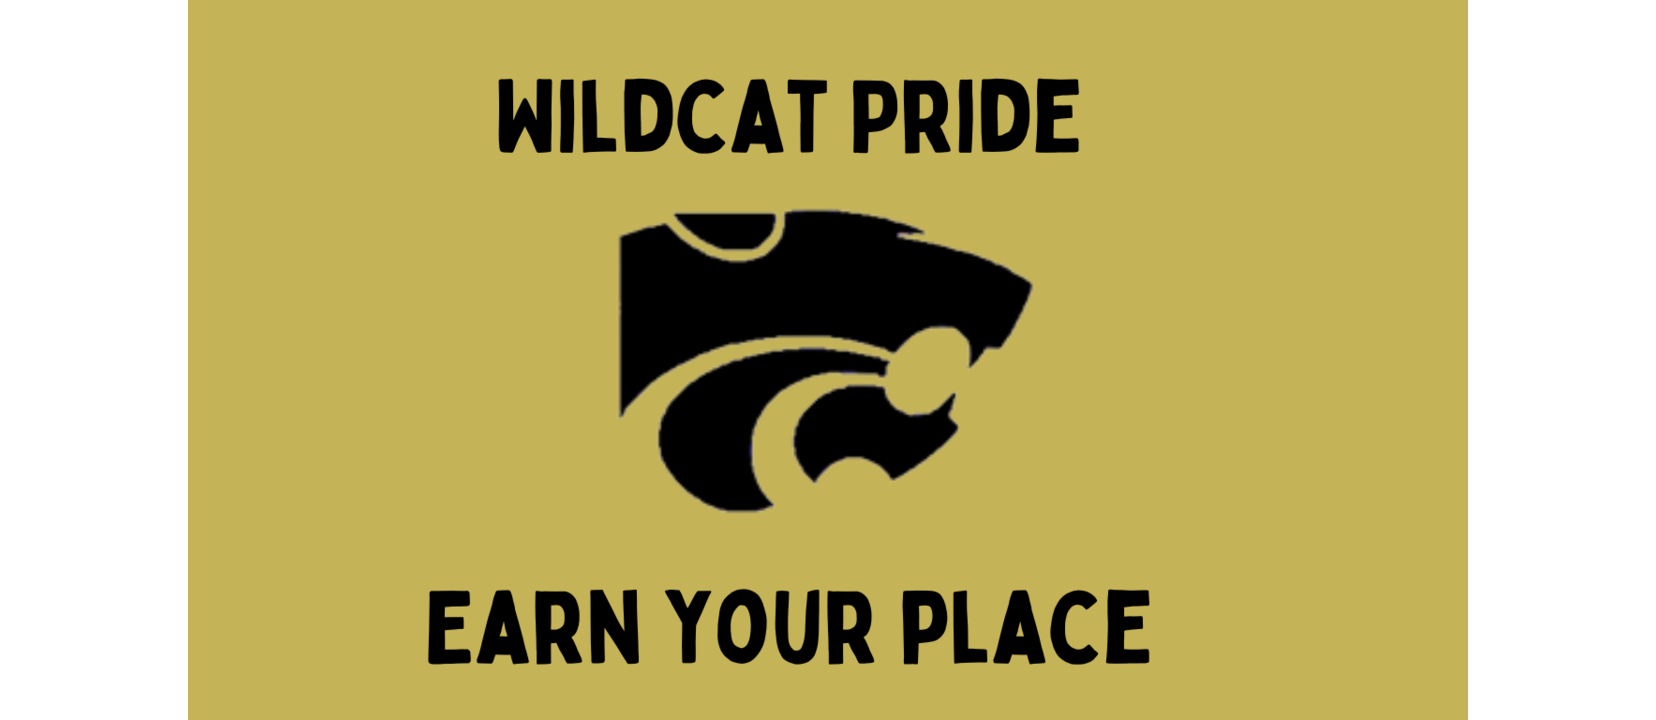 Wildcat Pride - Earn Your Place